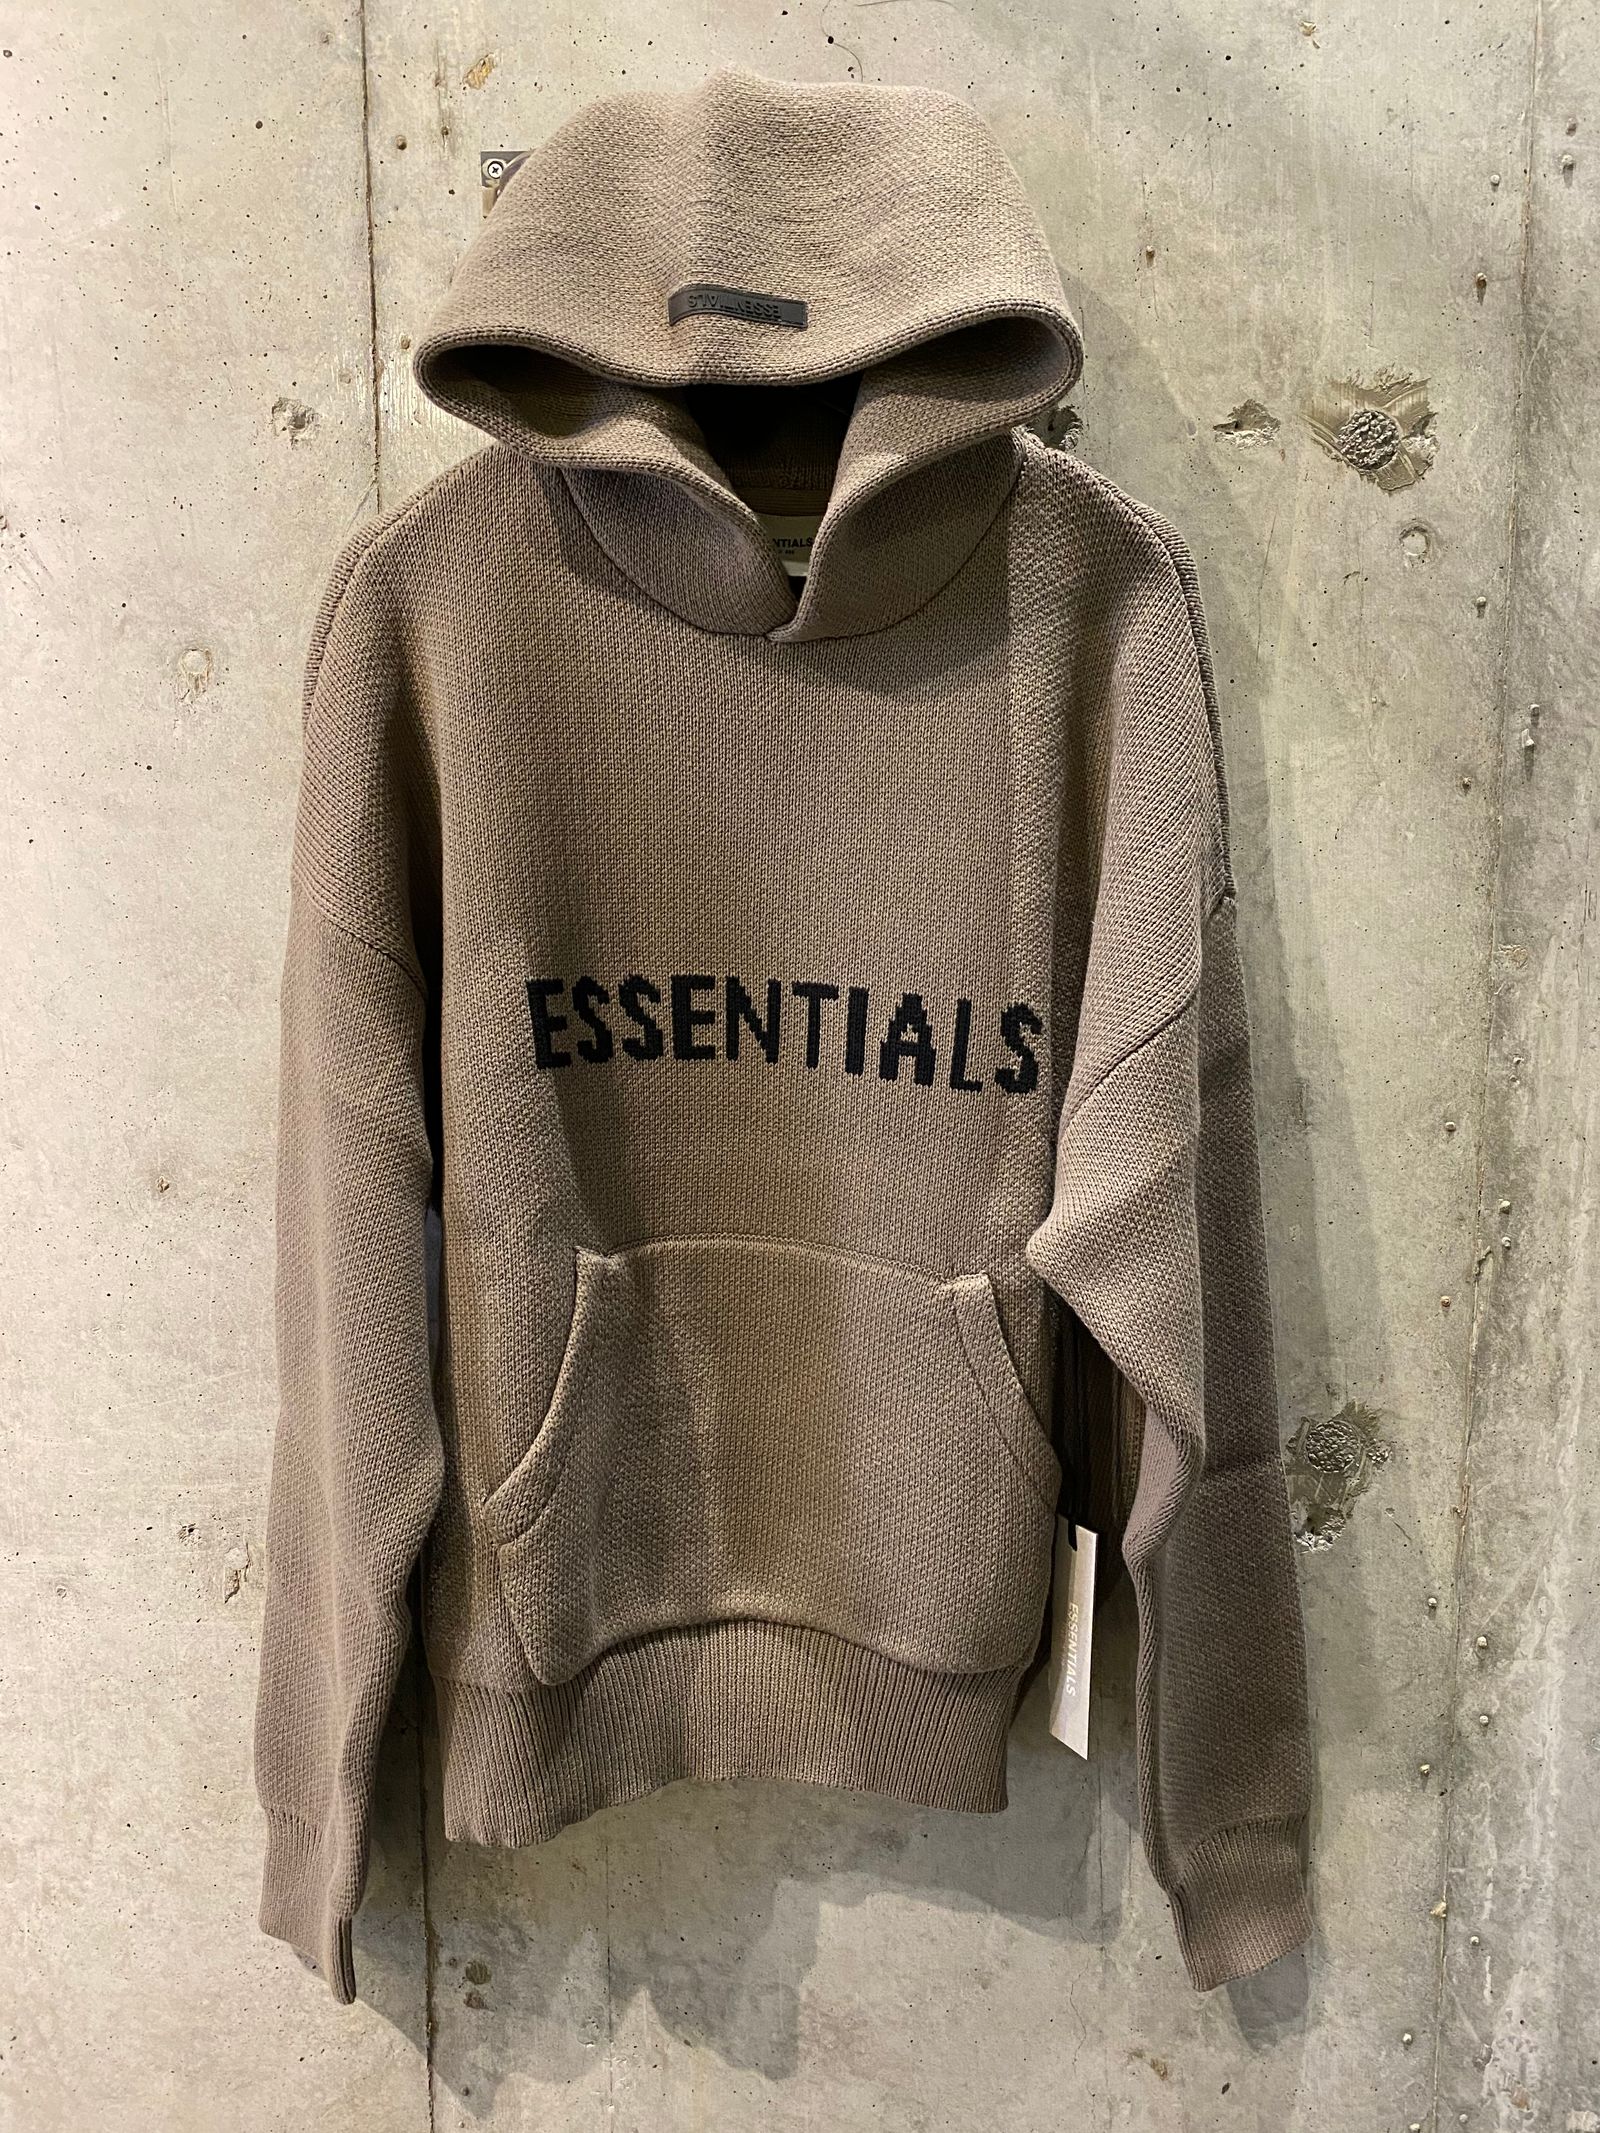 FOG ESSENTIALS - FOG ESSENTIALS KNIT HOODIE/taupe | R and another ...